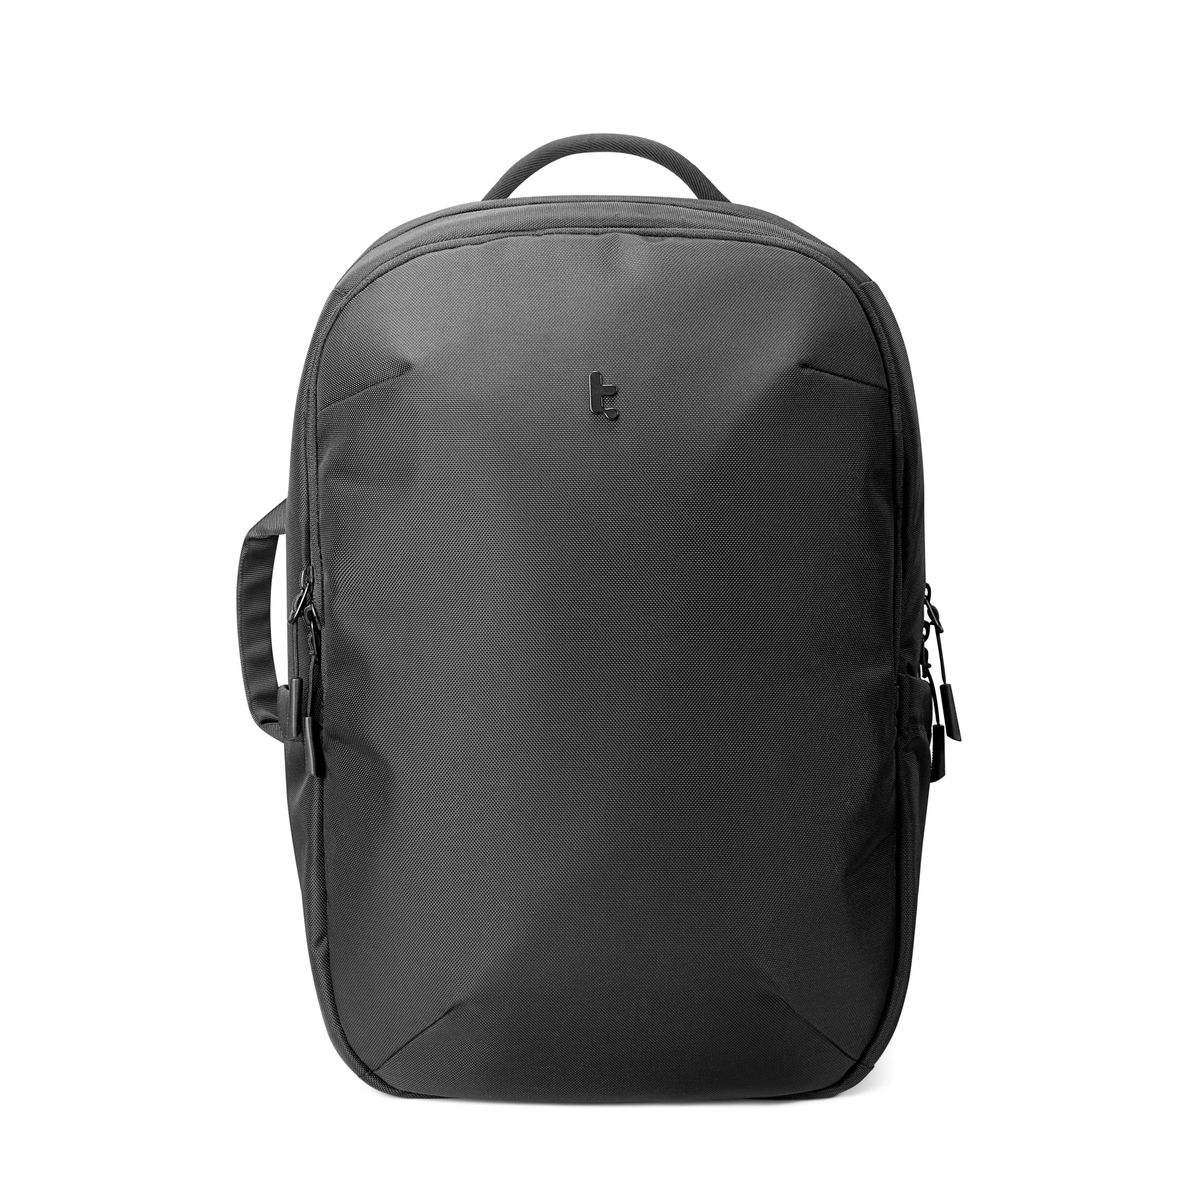 Tomtoc UrbanEX-T65 Laptop Backpack 15.6-inch | Shop Today. Get it ...